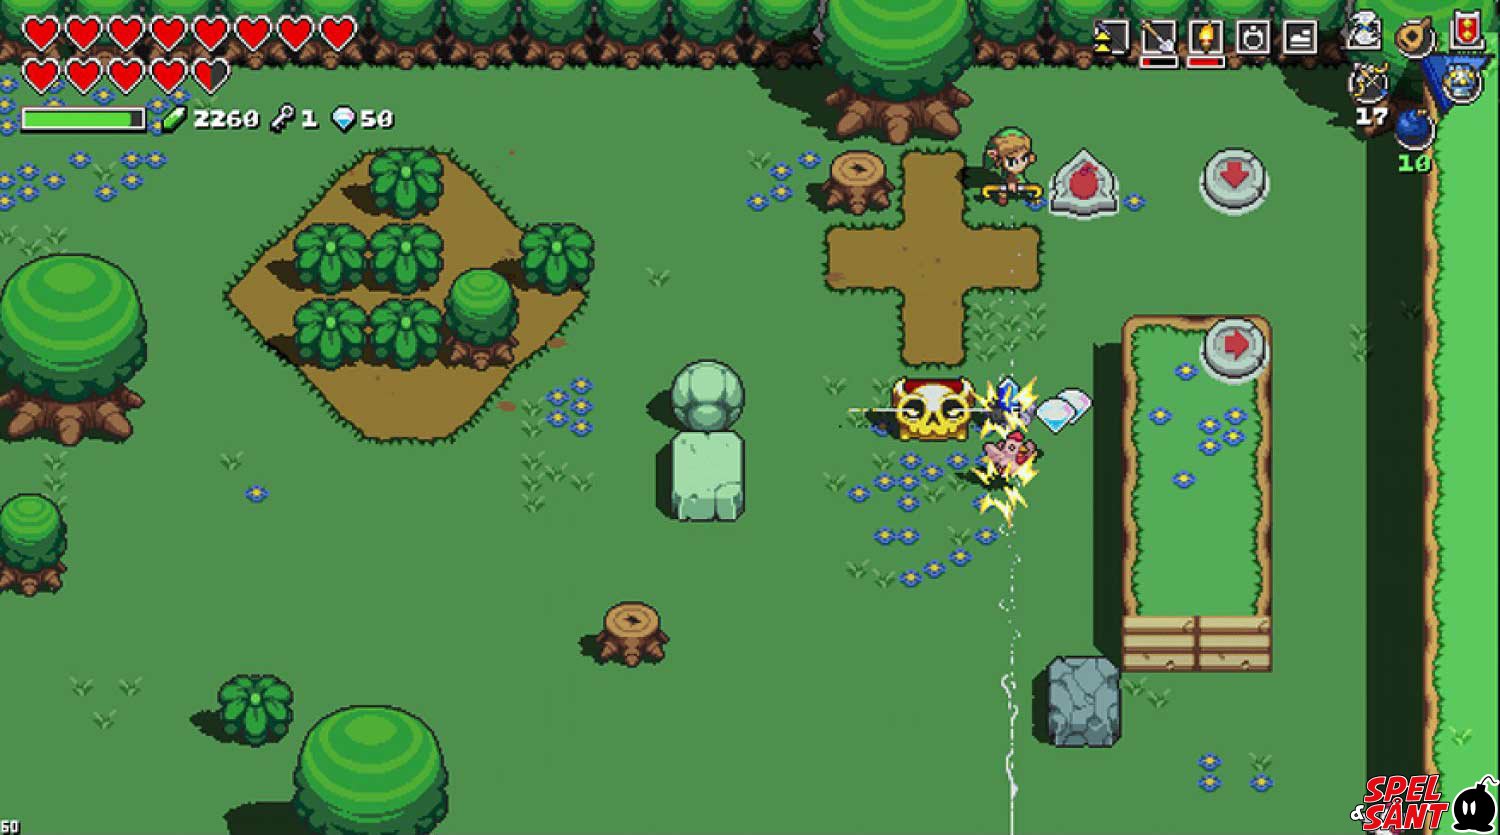 cadence of hyrule crypt of the necrodancer download free